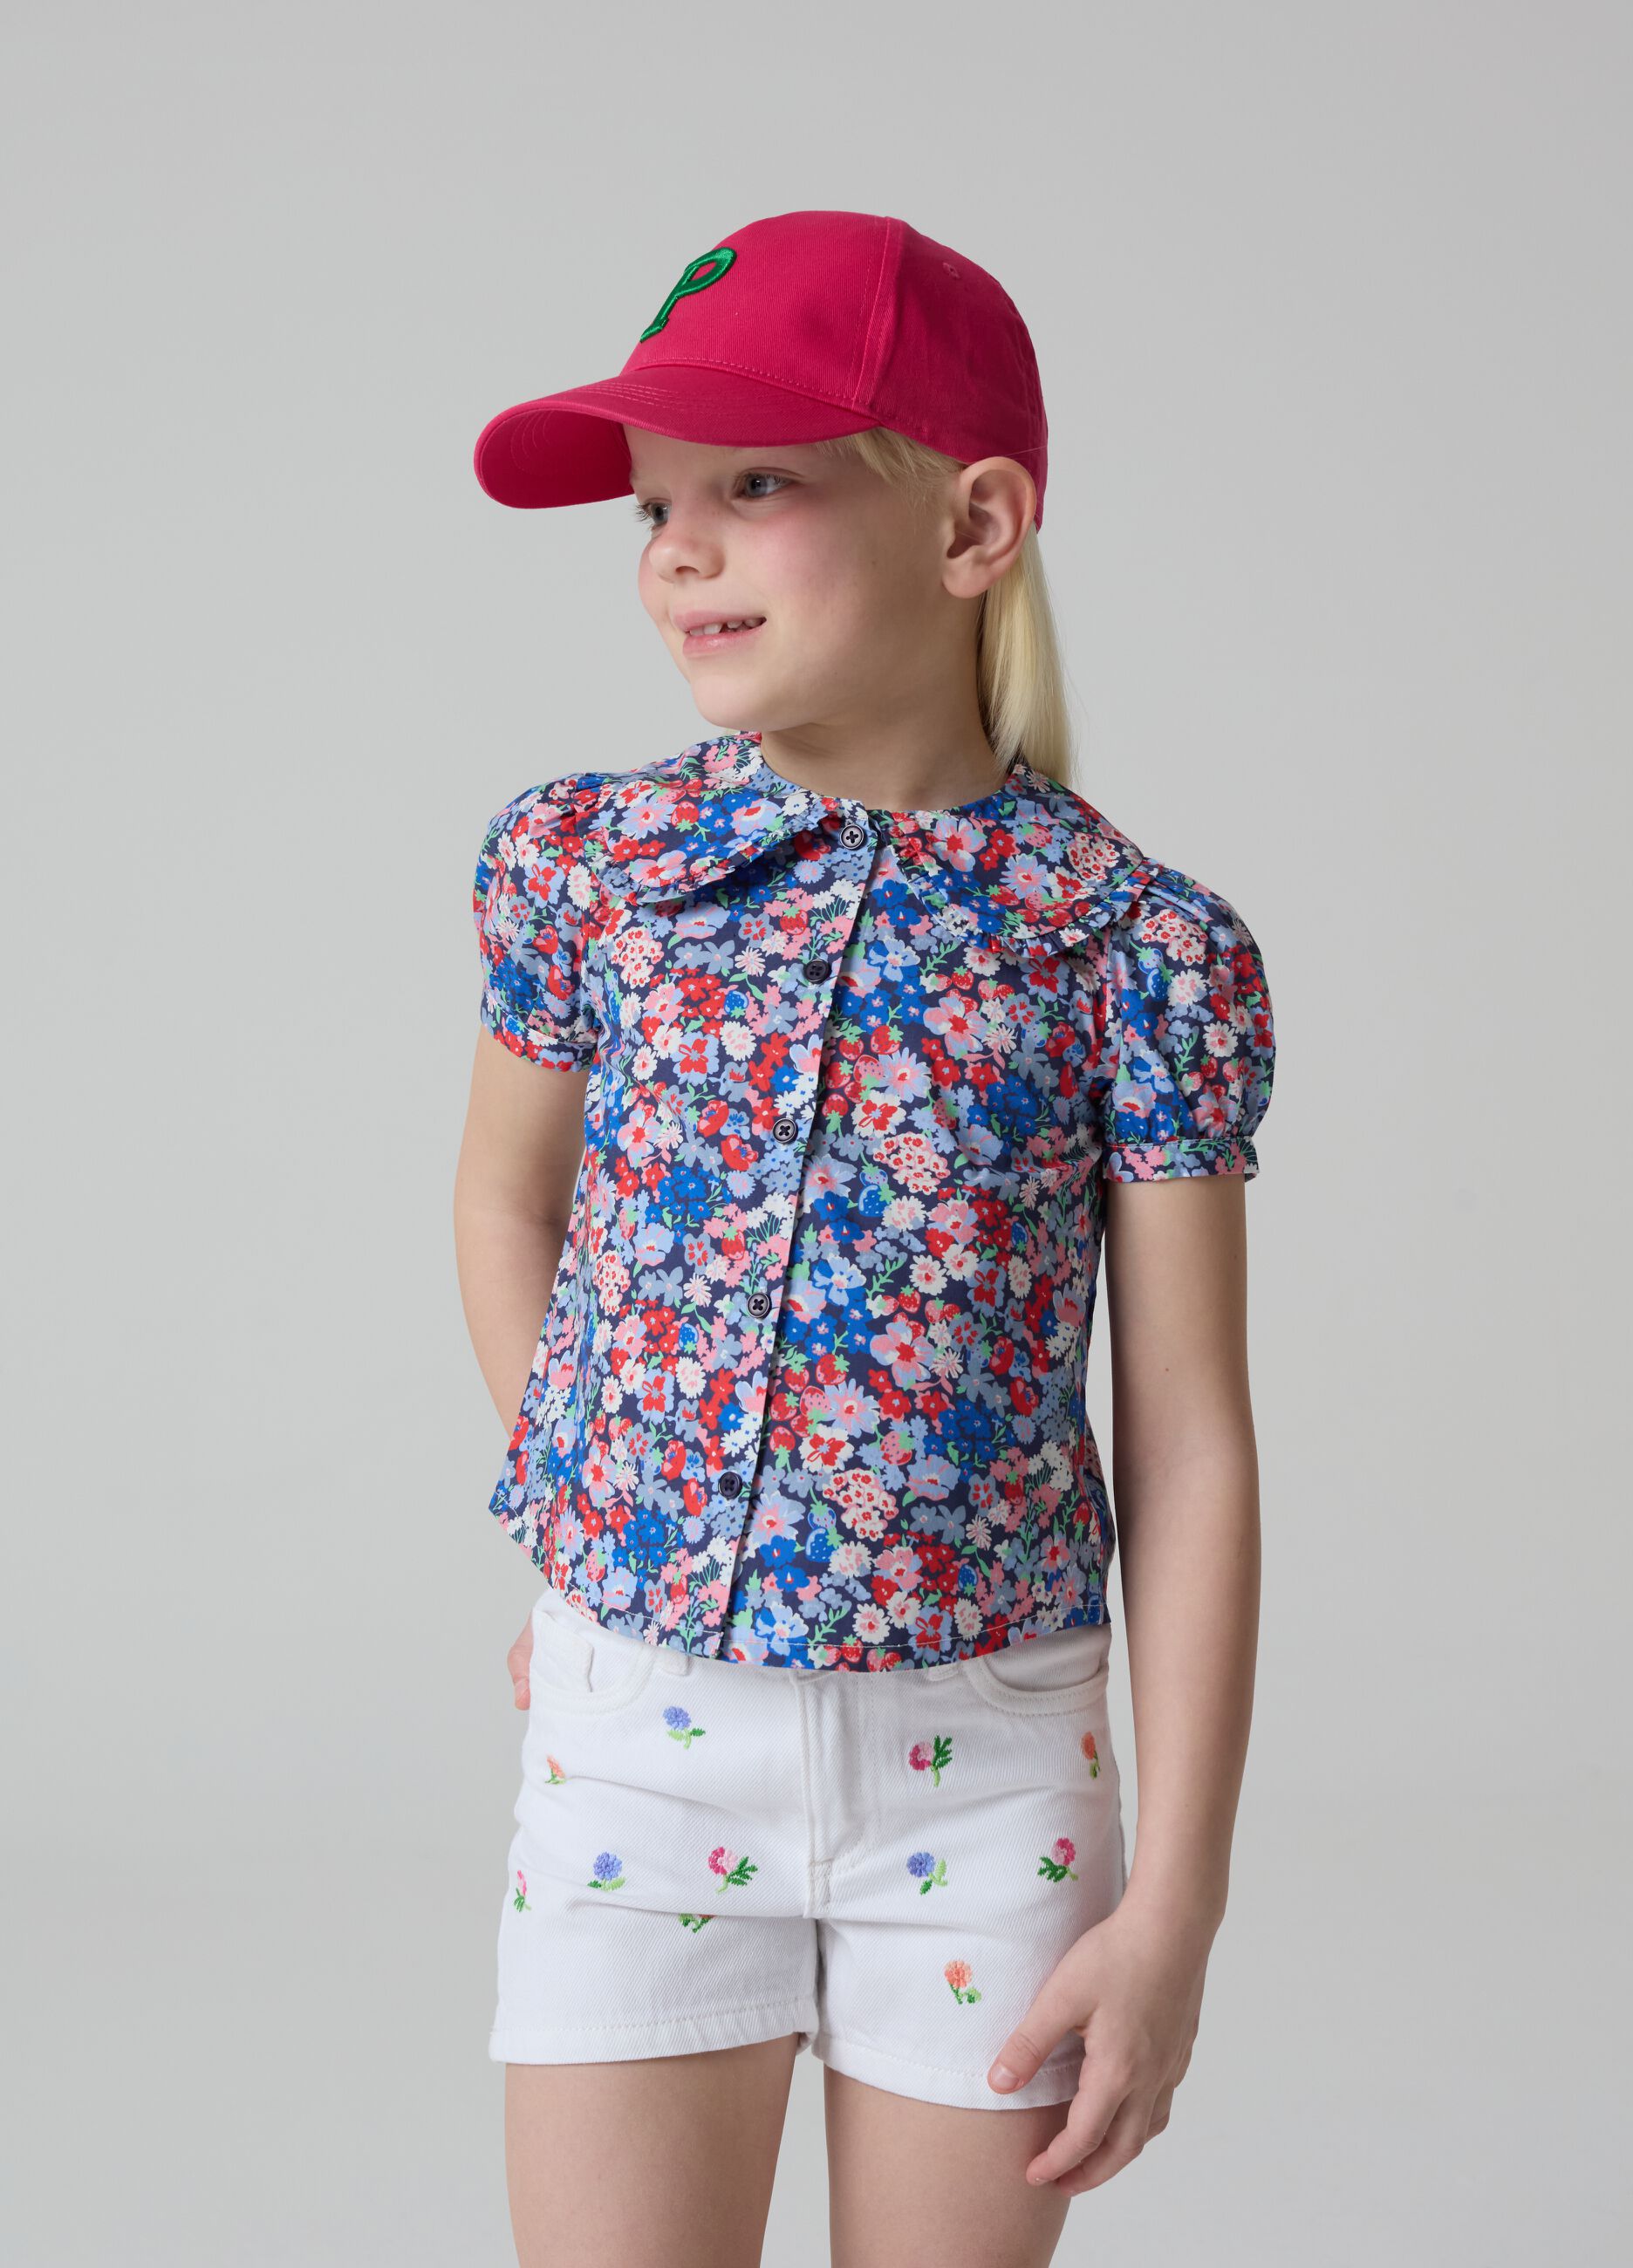 Floral shirt in cotton